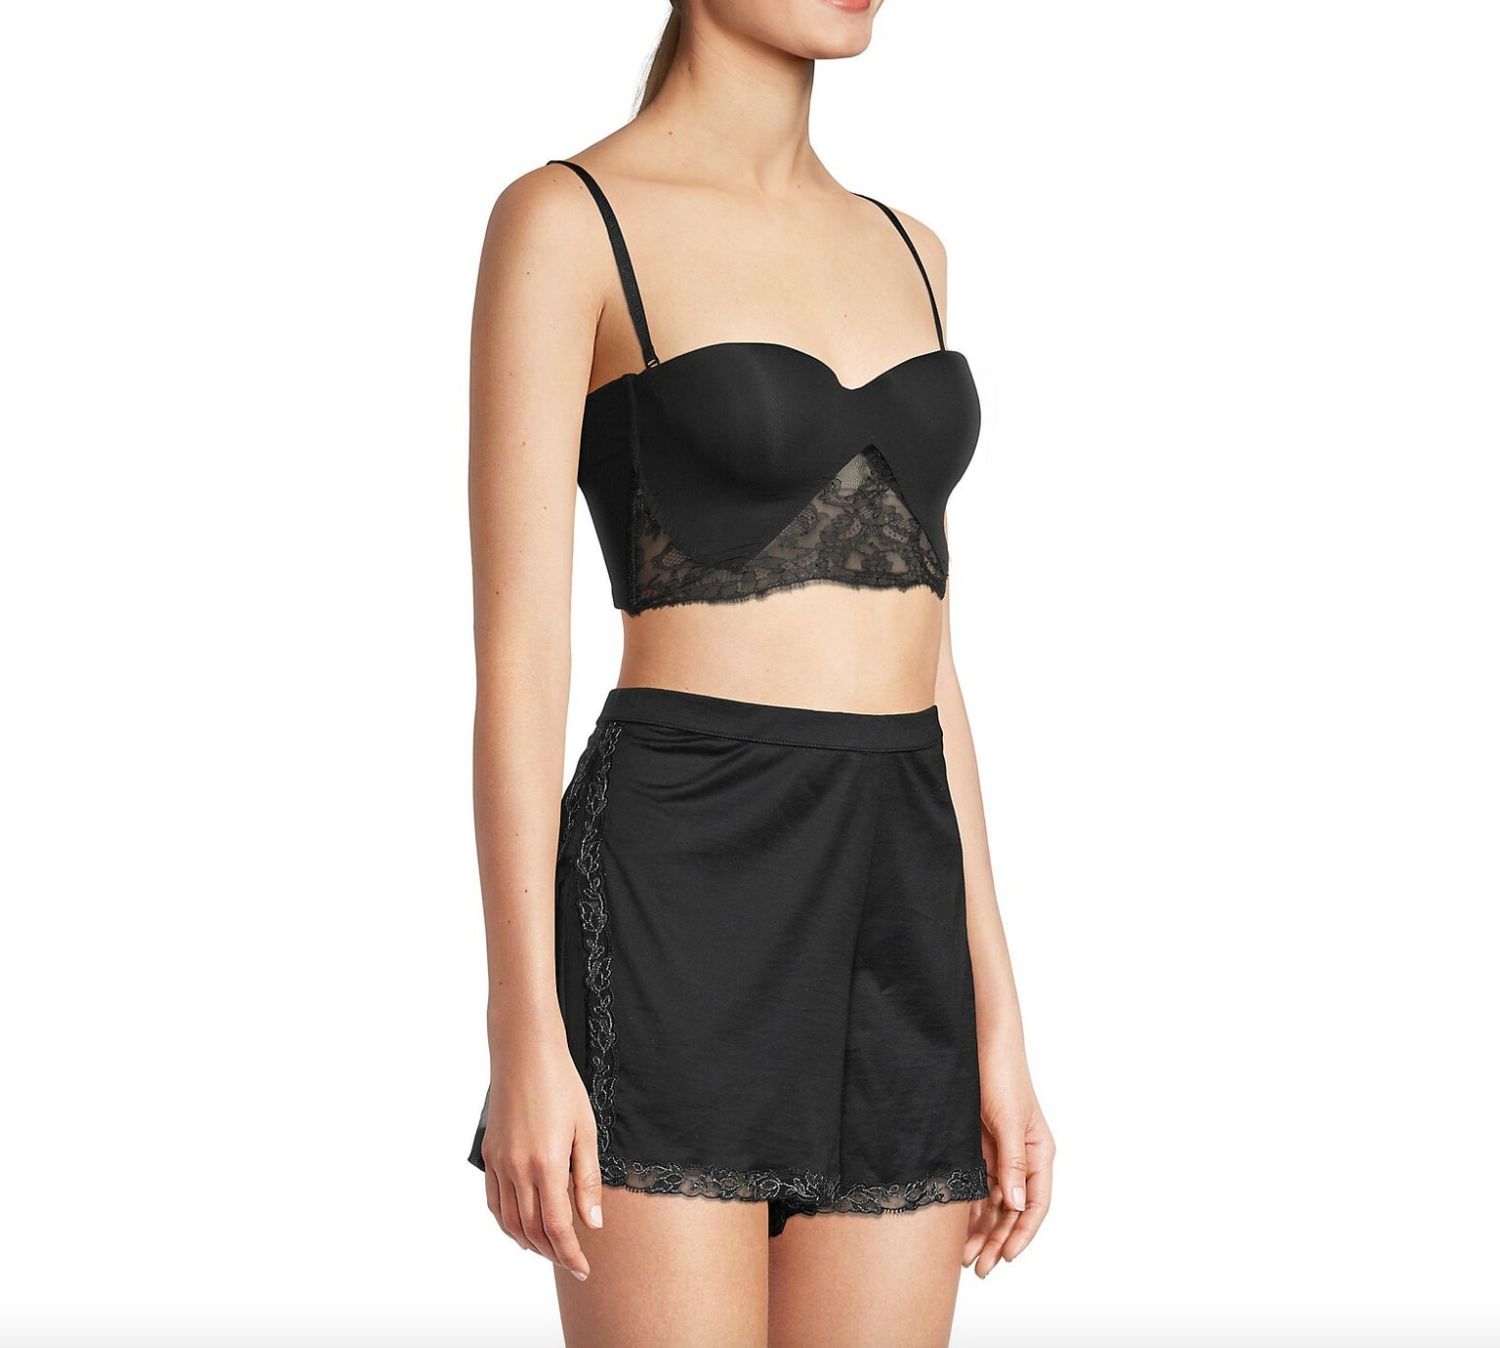 la-perla-strapless-brassiere-with-chantilly-lace